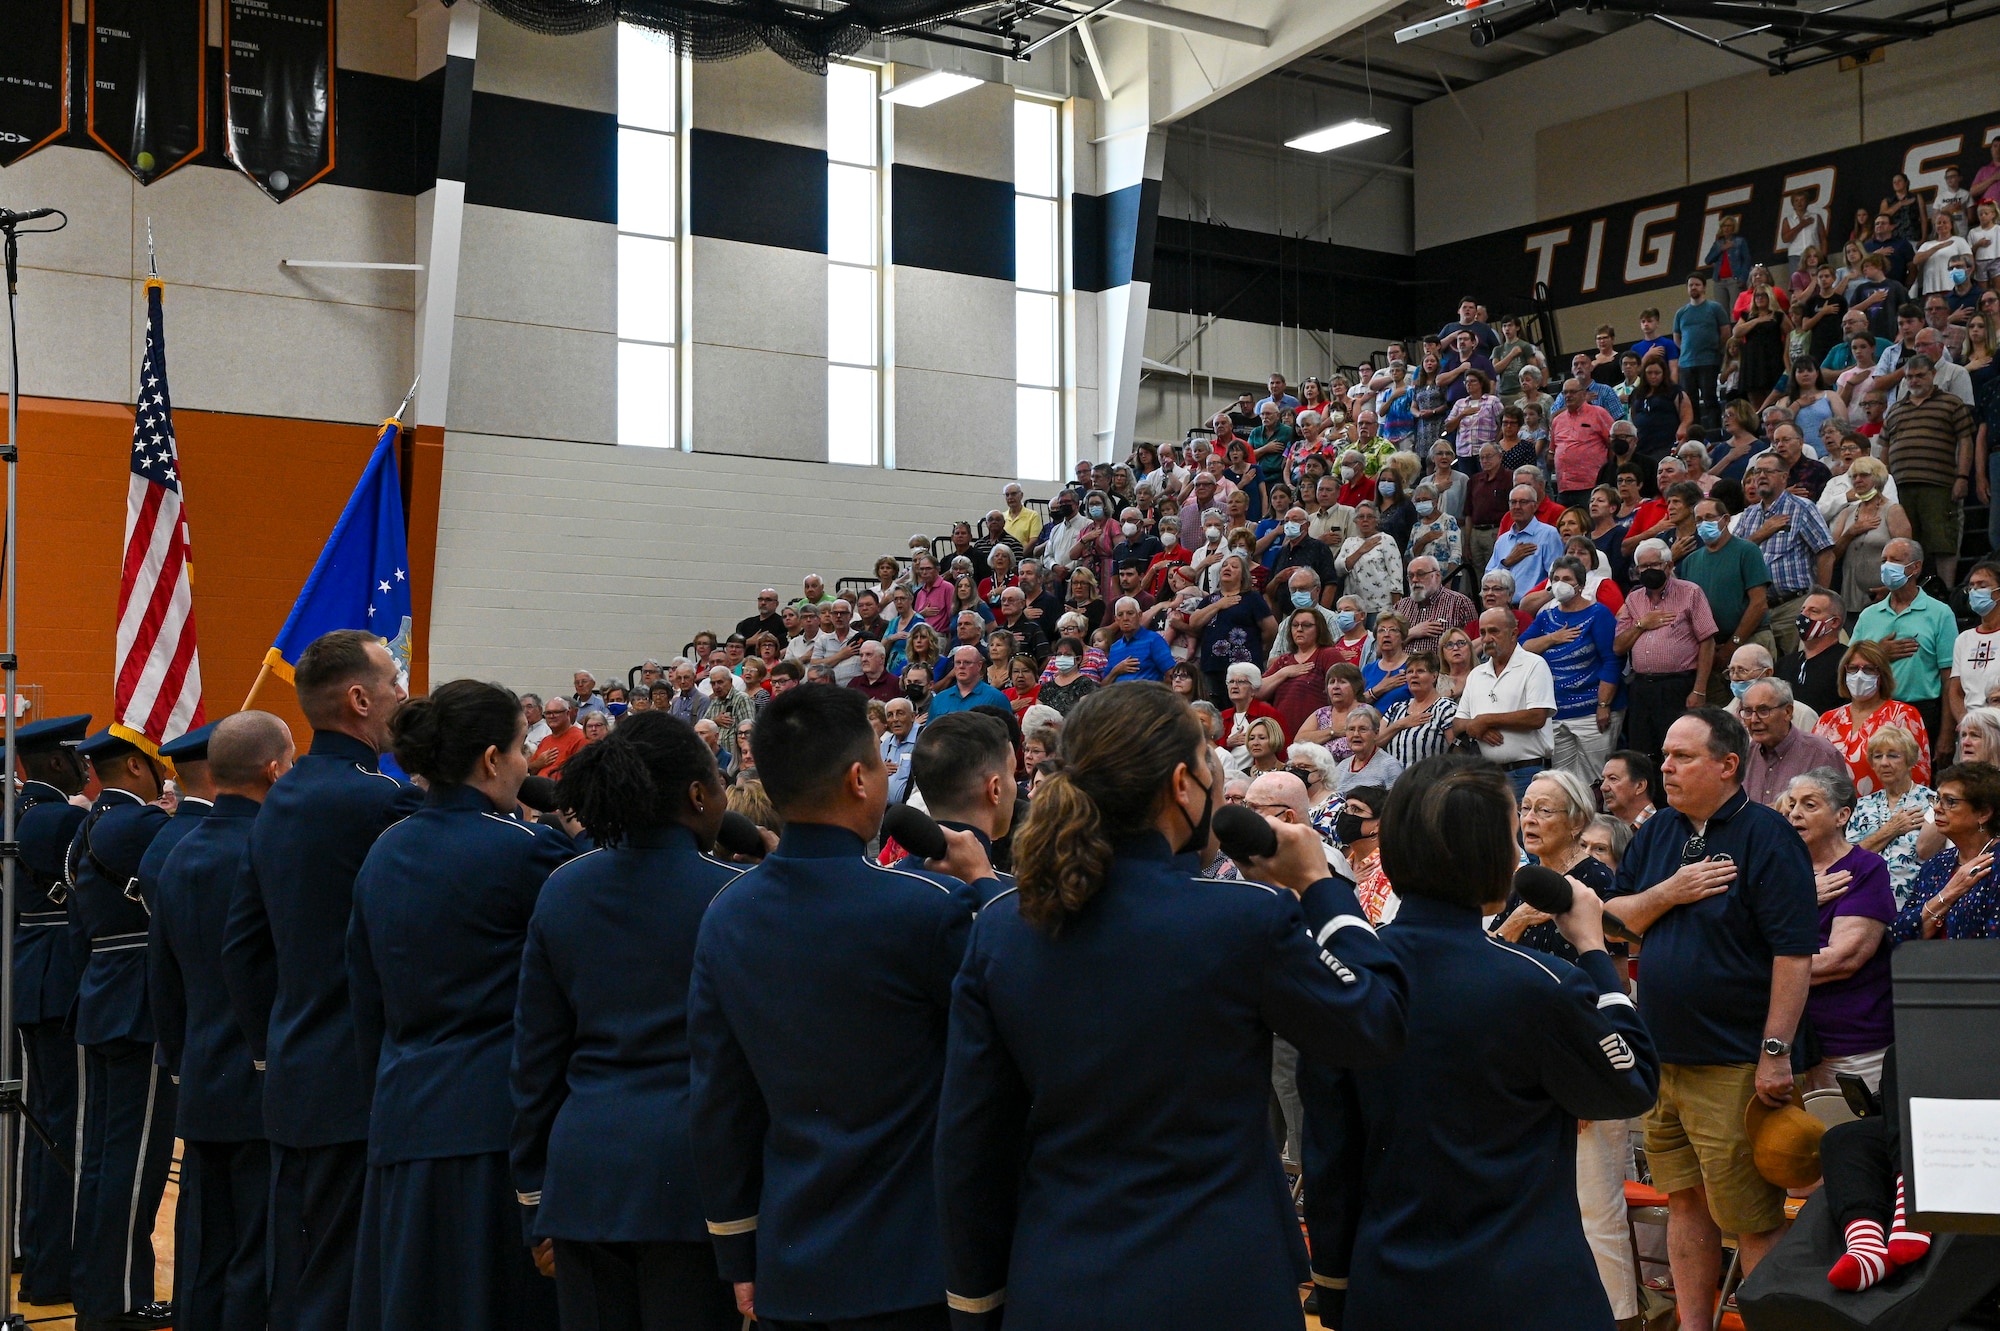 The Singing Sergeants, the official chorus of The United States Air Force Band, sing the national anthem during a tour at Paris, Ind., July 3, 2022. Featuring 24 active-duty musicians, the Singing Sergeants support military and civilian ceremonial and diplomatic functions, education outreach events, and concerts throughout metropolitan Washington, D.C., and the United States. (U.S. Air Force photo by Airman Bill Guilliam)